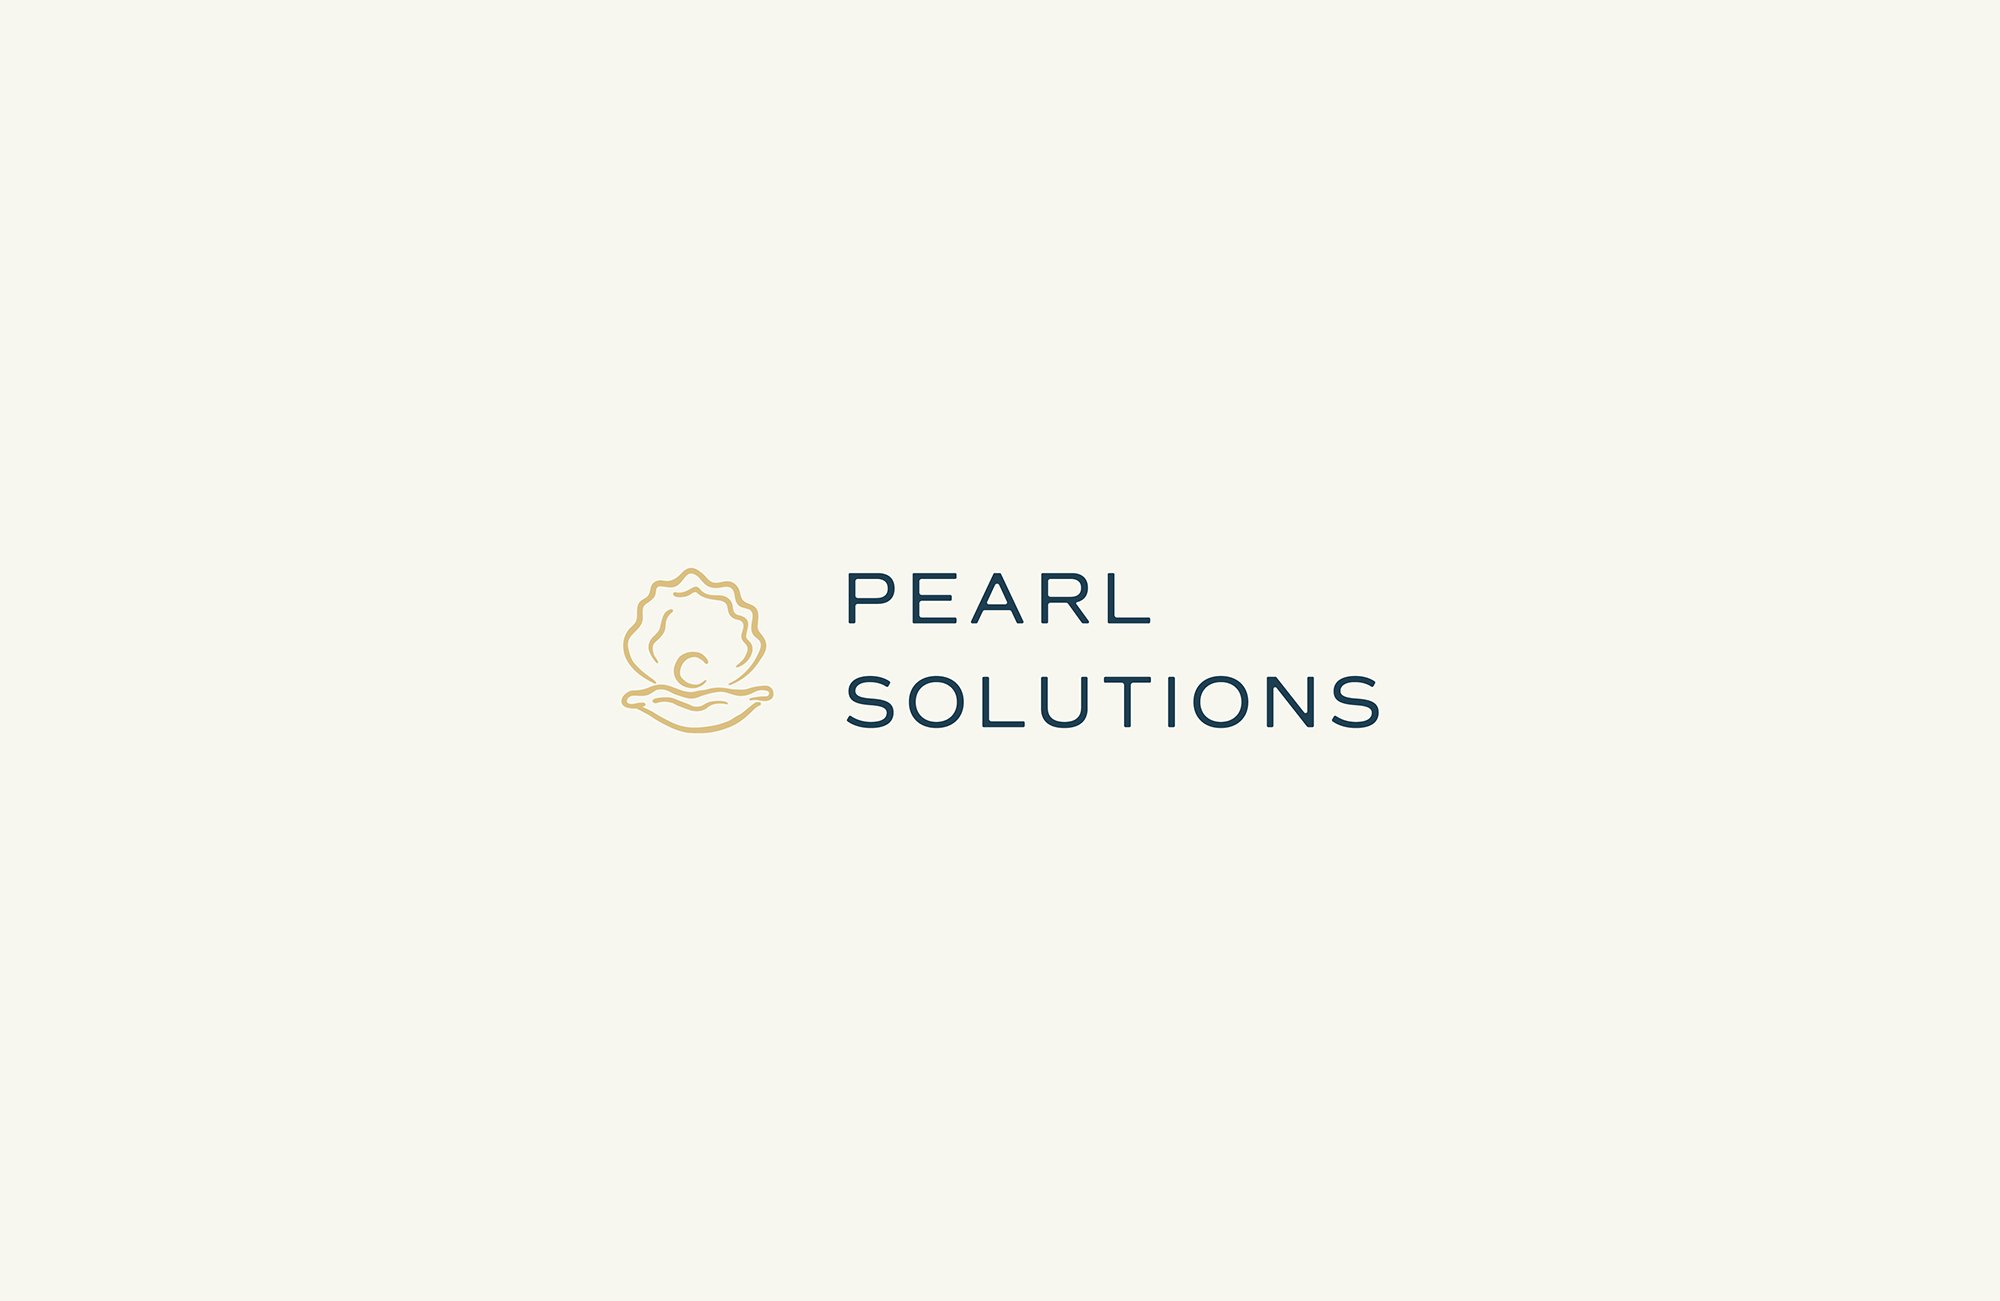 more-ours-pearl-solutions-logo2.jpg